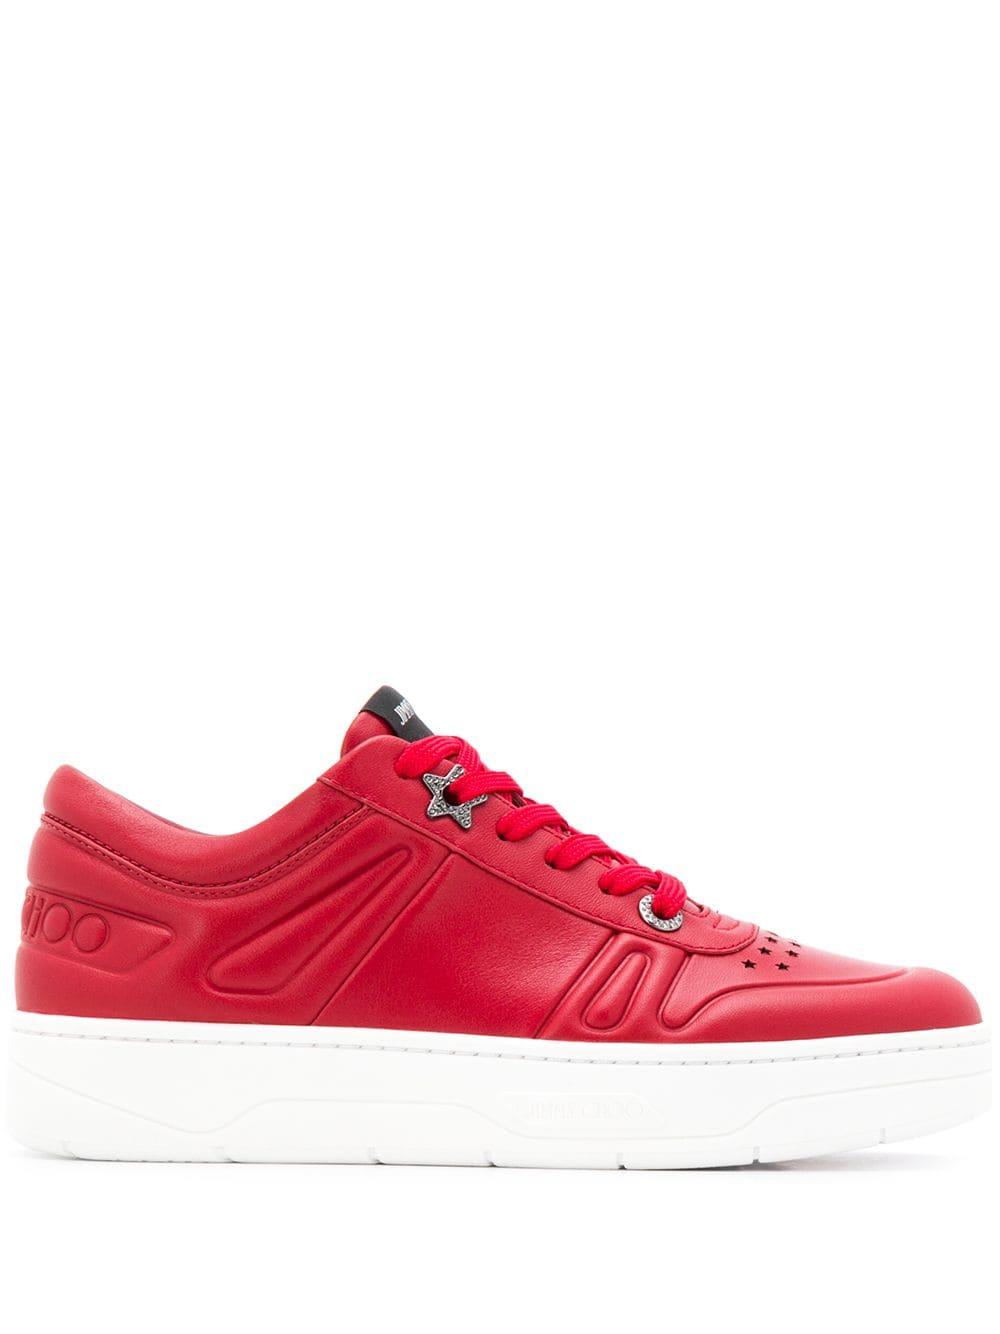 Jimmy Choo Leather Hawaii Low-top Sneakers in Red - Lyst